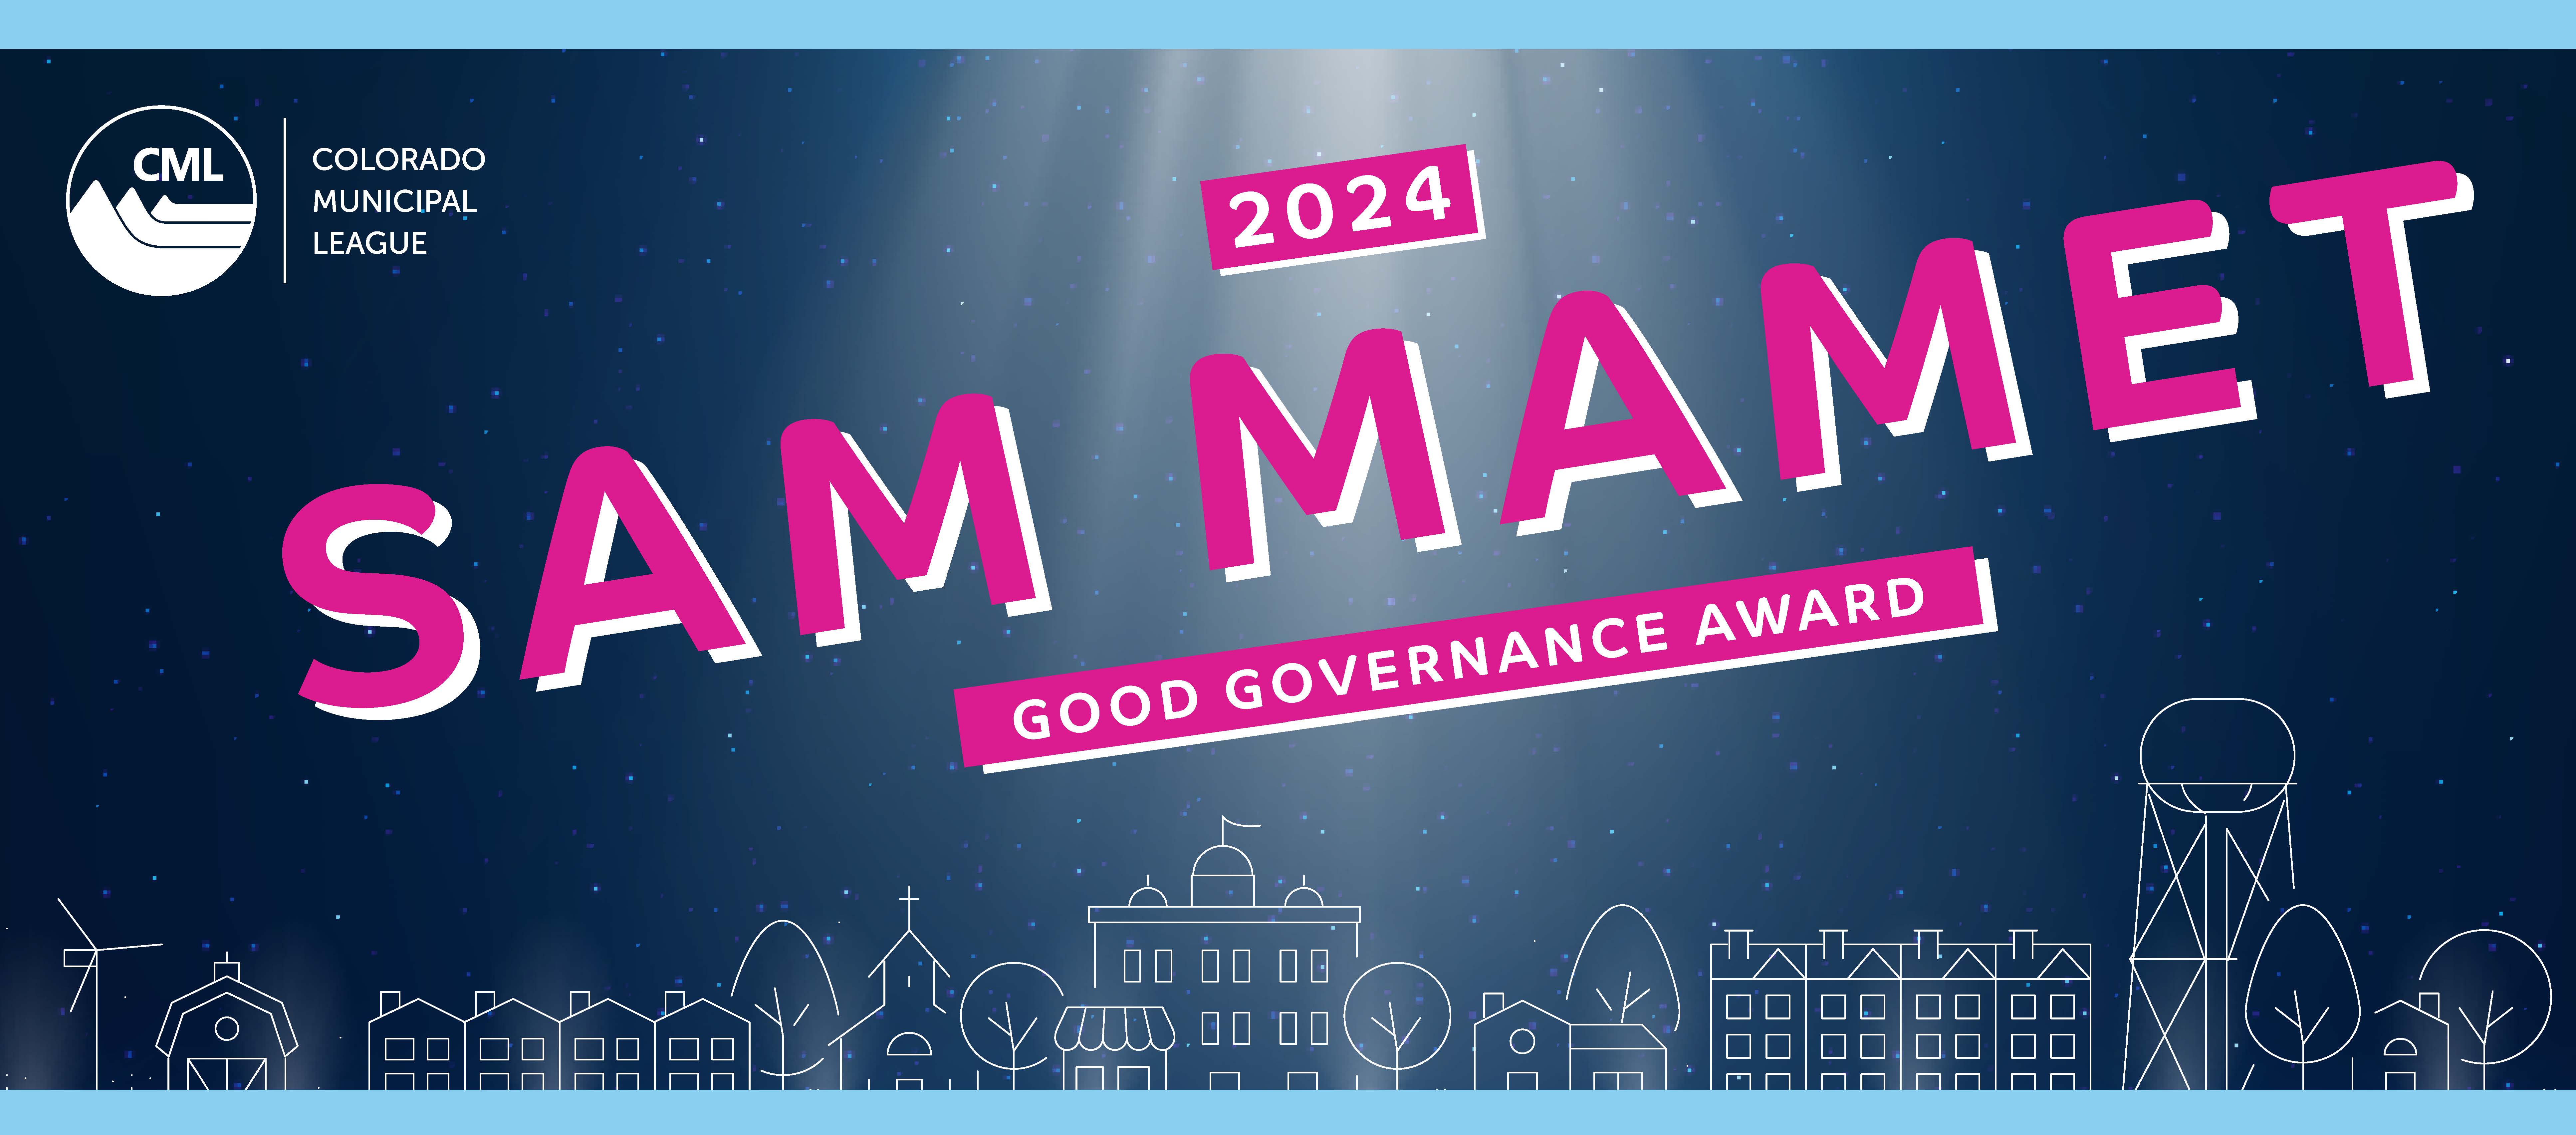 Cml logo ontop of a bokeh blue background with city scape and the words 2024 Sam Mamet Good Governance Award